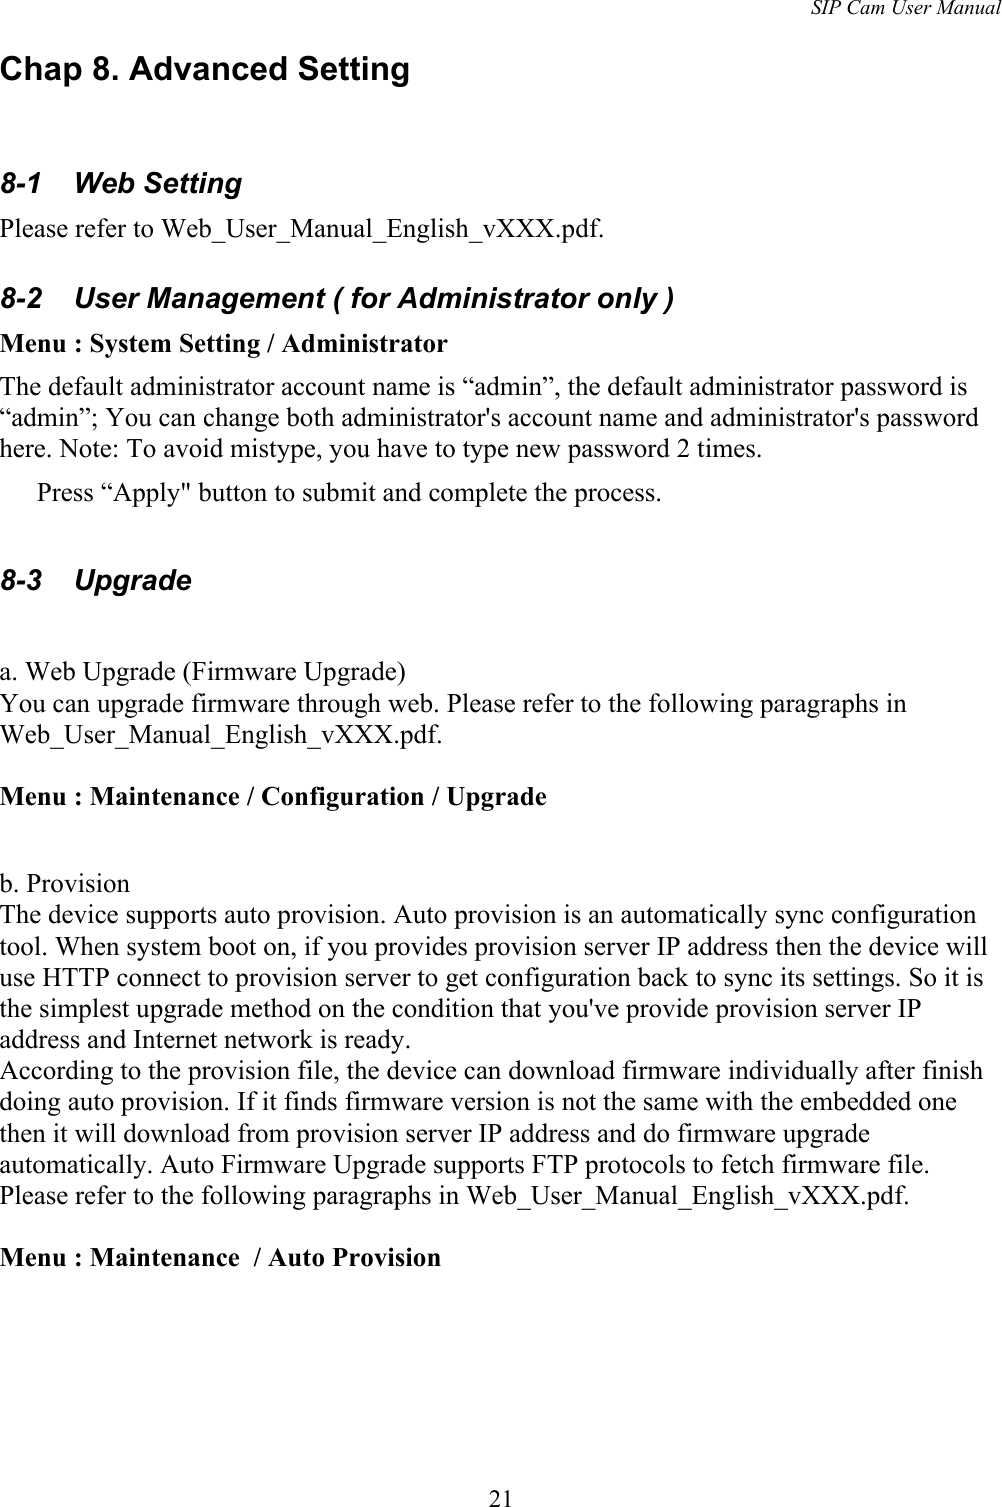 SIP Cam User ManualChap 8. Advanced Setting8-1  Web SettingPlease refer to Web_User_Manual_English_vXXX.pdf.8-2  User Management ( for Administrator only )Menu : System Setting / AdministratorThe default administrator account name is “admin”, the default administrator password is “admin”; You can change both administrator&apos;s account name and administrator&apos;s password here. Note: To avoid mistype, you have to type new password 2 times.Press “Apply&quot; button to submit and complete the process.8-3  Upgradea. Web Upgrade (Firmware Upgrade)You can upgrade firmware through web. Please refer to the following paragraphs in Web_User_Manual_English_vXXX.pdf.Menu : Maintenance / Configuration / Upgradeb. ProvisionThe device supports auto provision. Auto provision is an automatically sync configuration tool. When system boot on, if you provides provision server IP address then the device will use HTTP connect to provision server to get configuration back to sync its settings. So it is the simplest upgrade method on the condition that you&apos;ve provide provision server IP address and Internet network is ready. According to the provision file, the device can download firmware individually after finish doing auto provision. If it finds firmware version is not the same with the embedded one then it will download from provision server IP address and do firmware upgrade automatically. Auto Firmware Upgrade supports FTP protocols to fetch firmware file.Please refer to the following paragraphs in Web_User_Manual_English_vXXX.pdf.Menu : Maintenance  / Auto Provision21